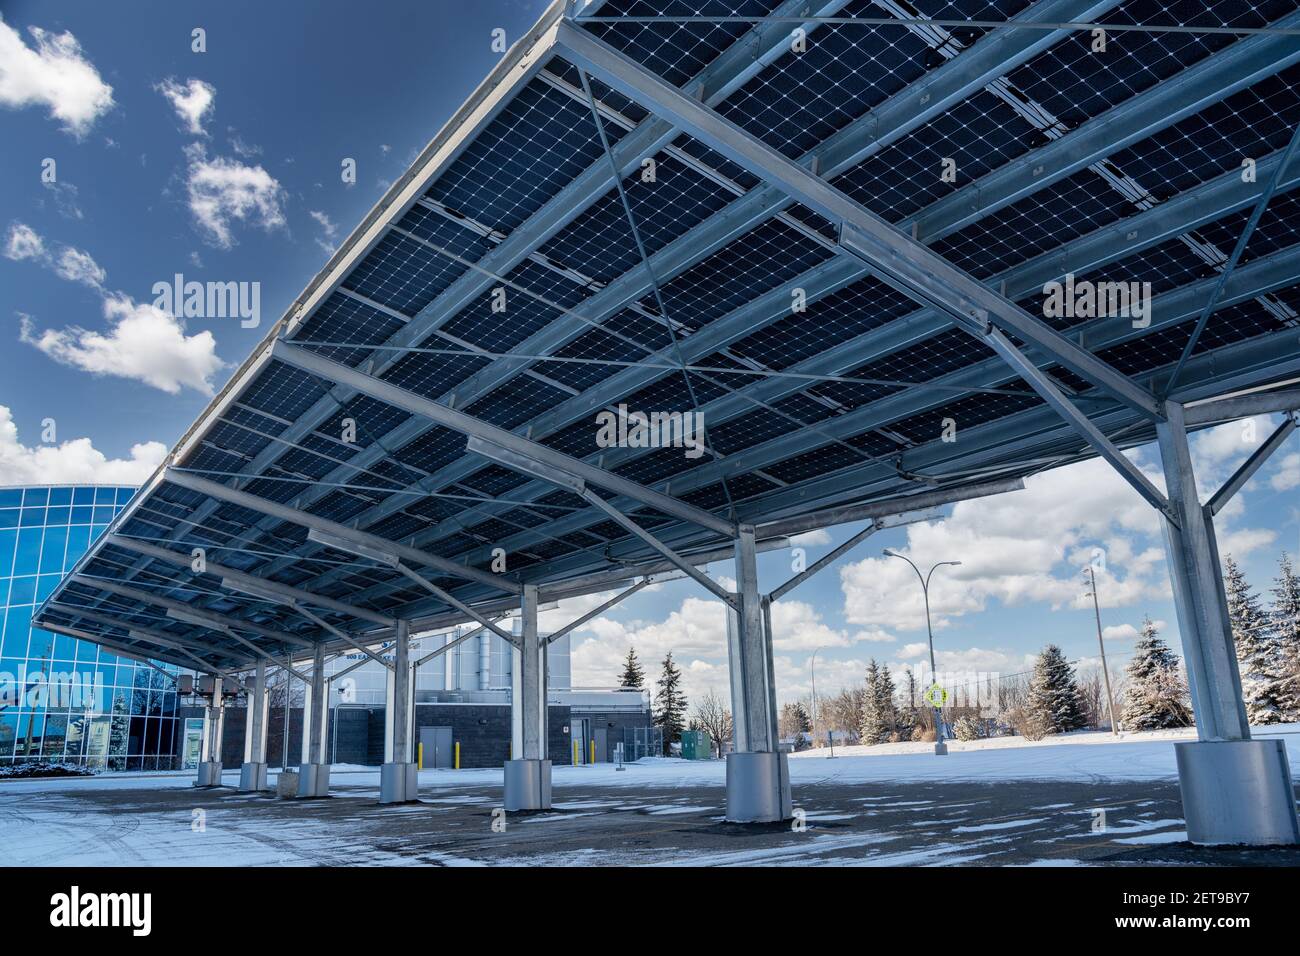 A modern solar carport for public vehicle parking is outfitted with solar panels producing renewable energy Stock Photo